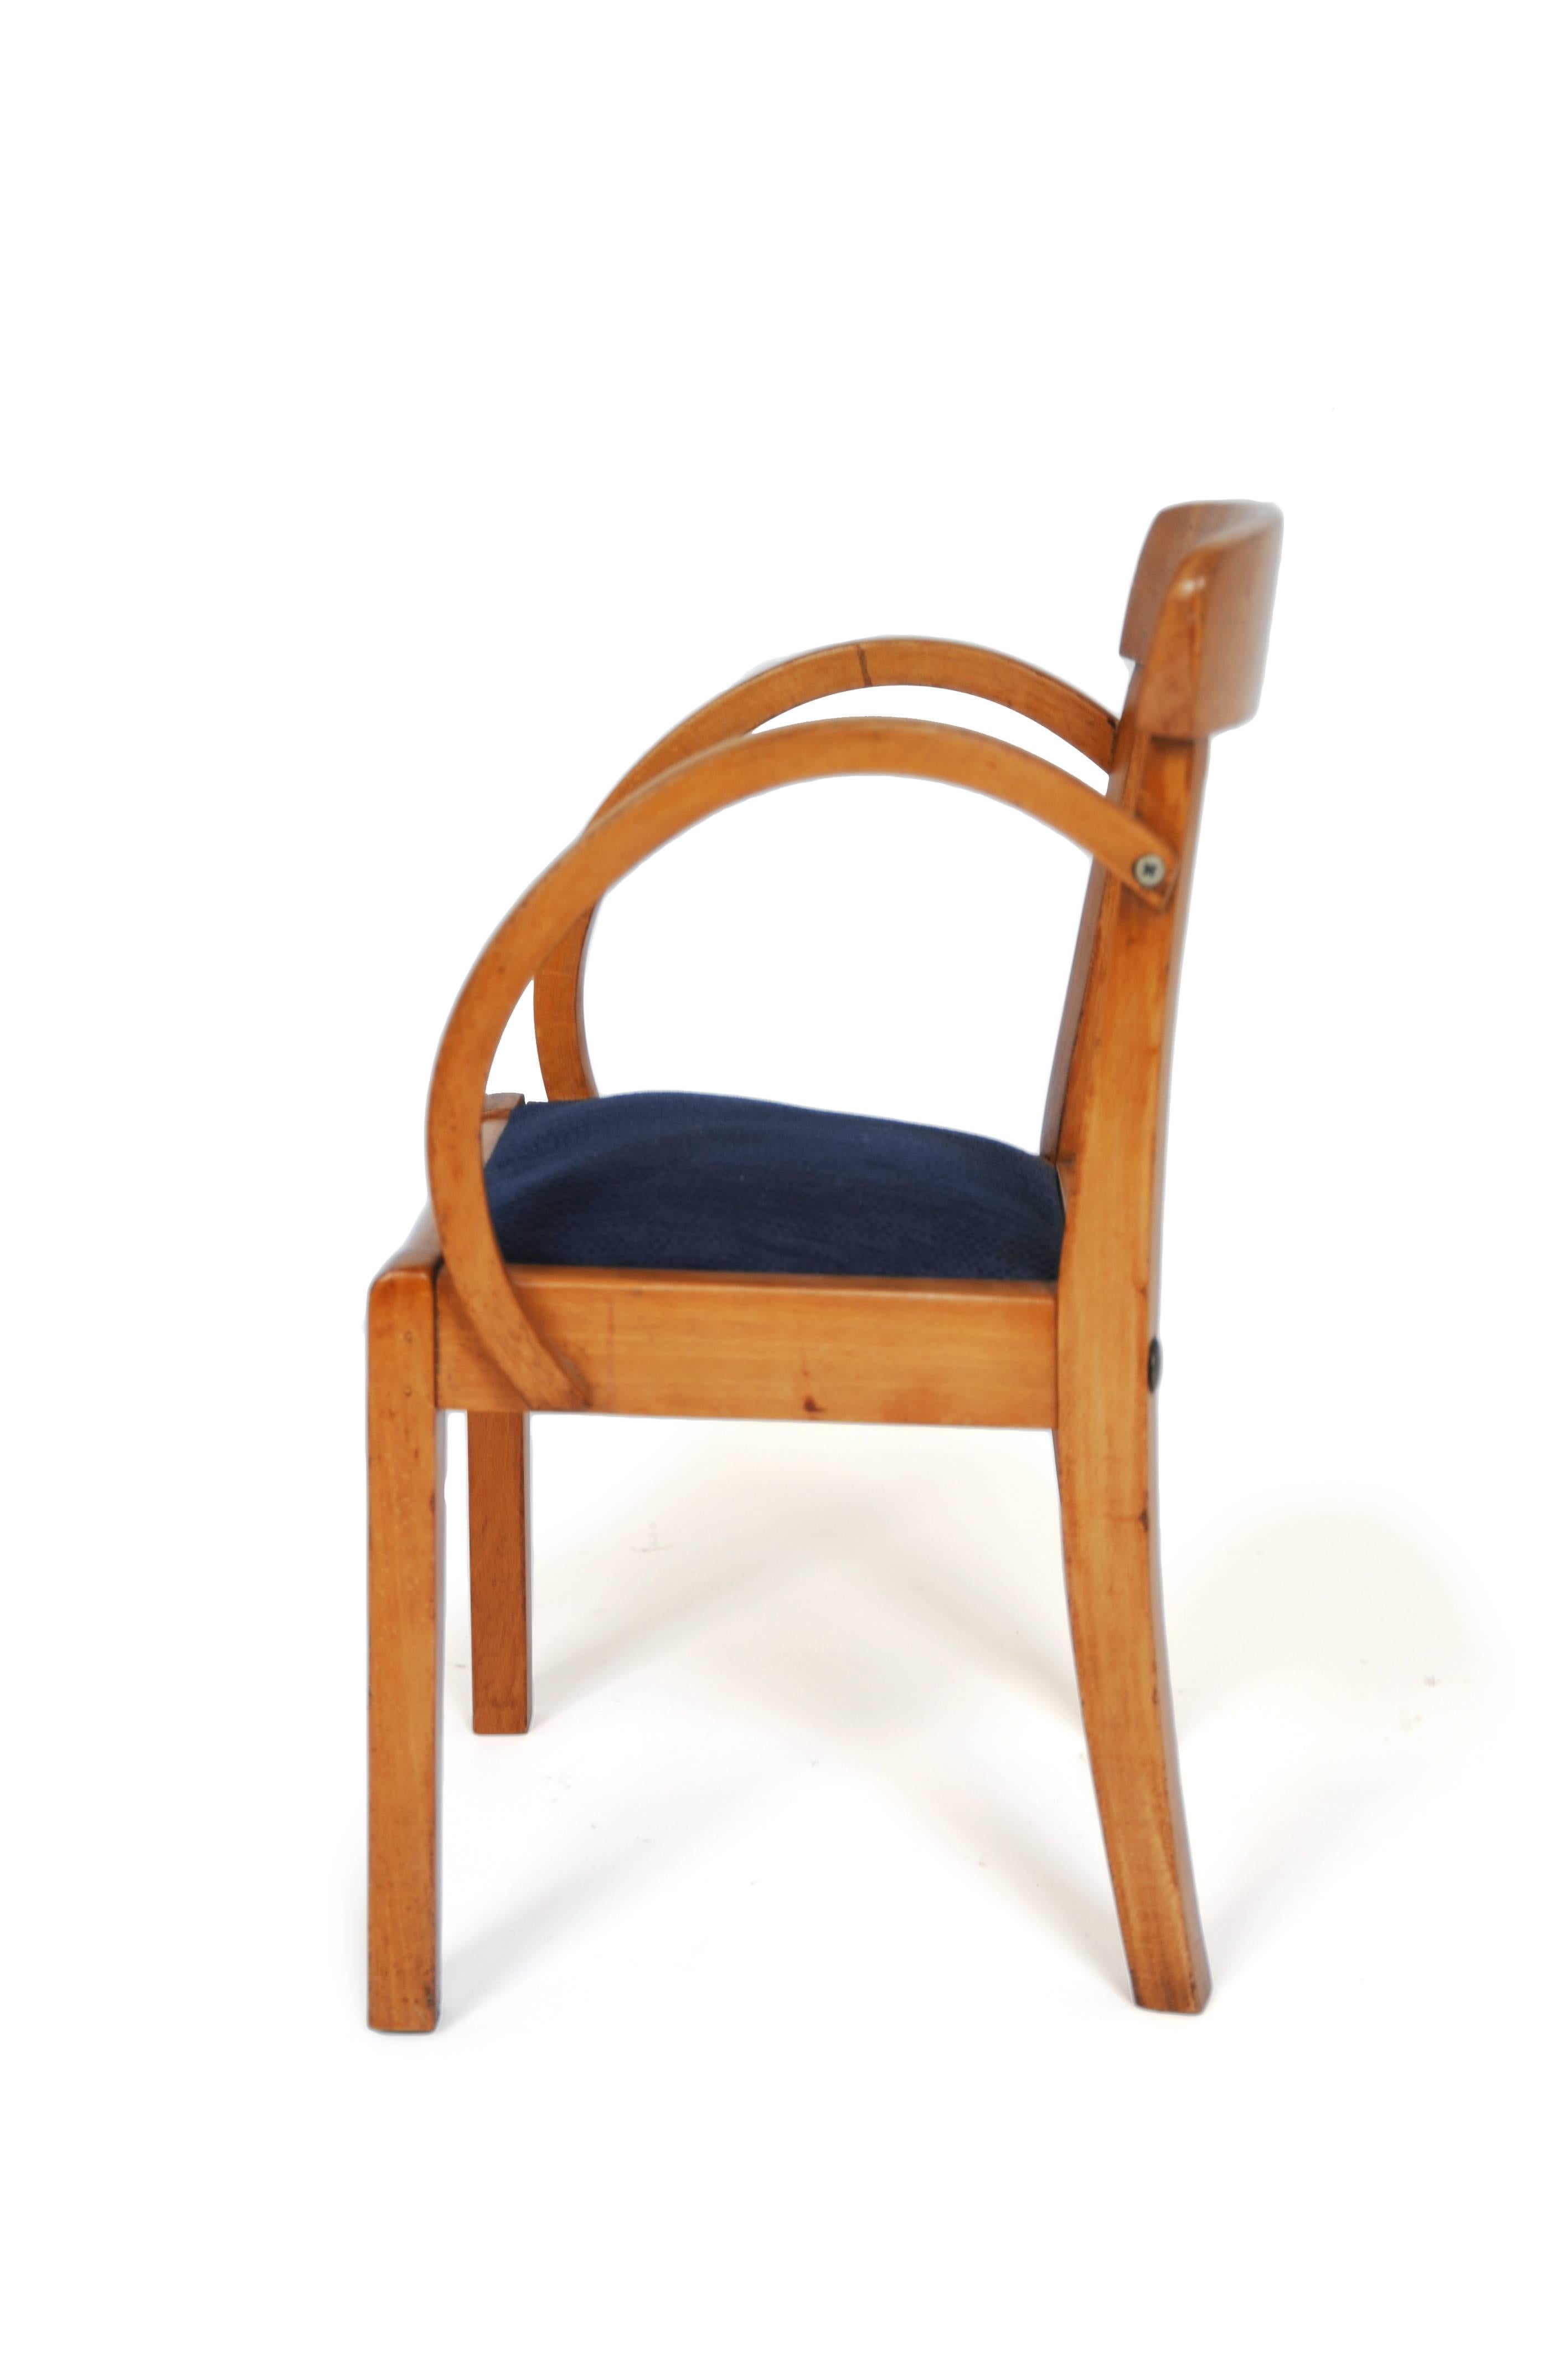 Baumann chair, Baumann France, vintage, France, 1960s.

Baumann chair
Baumann France
Vintage, France, 1960s
Varnished beech bentwood with upholstered seat
Measures: H 21 in, W 12 in, D 12 in (seat H 11.75 in).